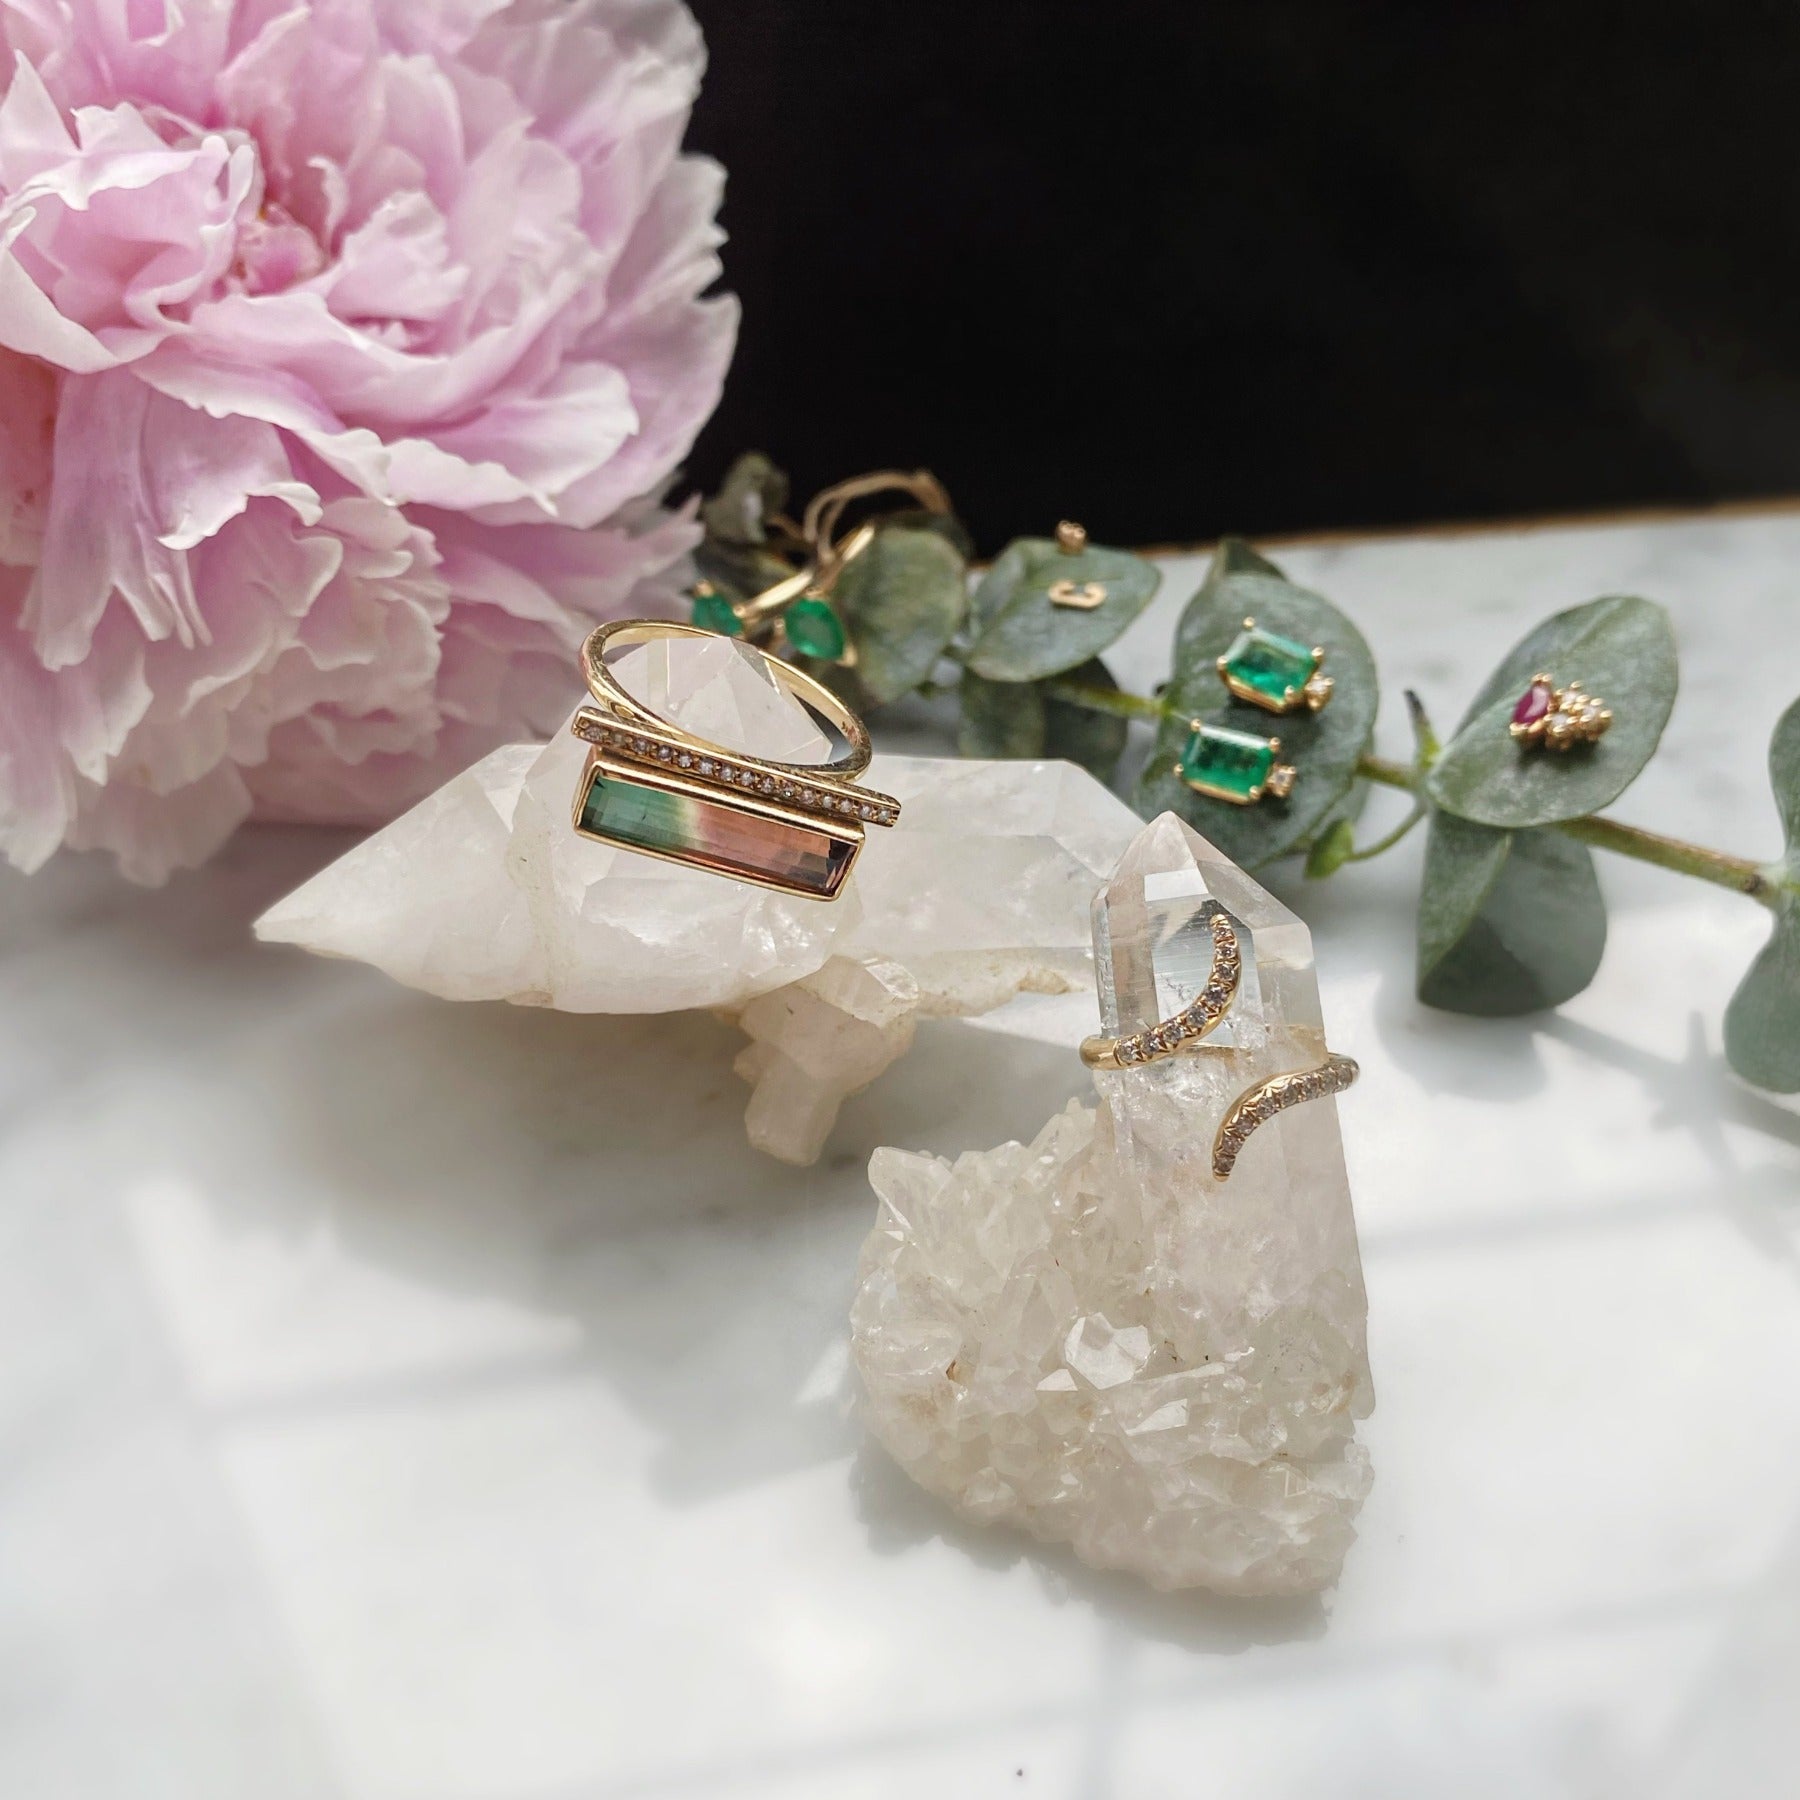 Tourmaline Gemstone &amp; Diamond Ring with other gemstone earrings on display - Camille Jewelry